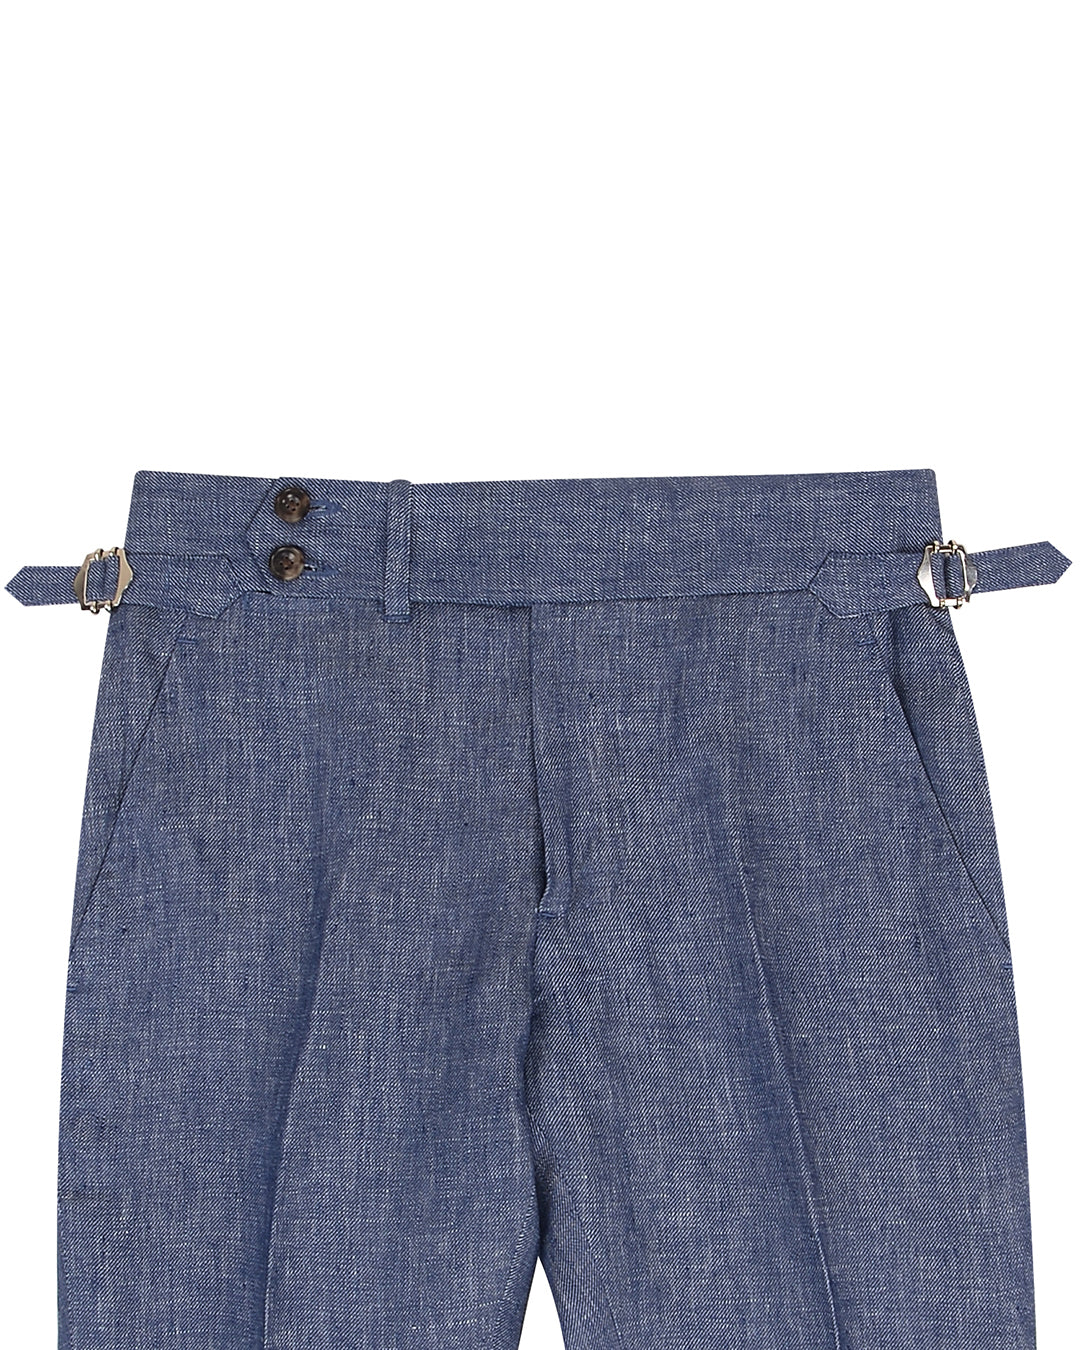 Front view of custom linen pants for men by Luxire in denim blue